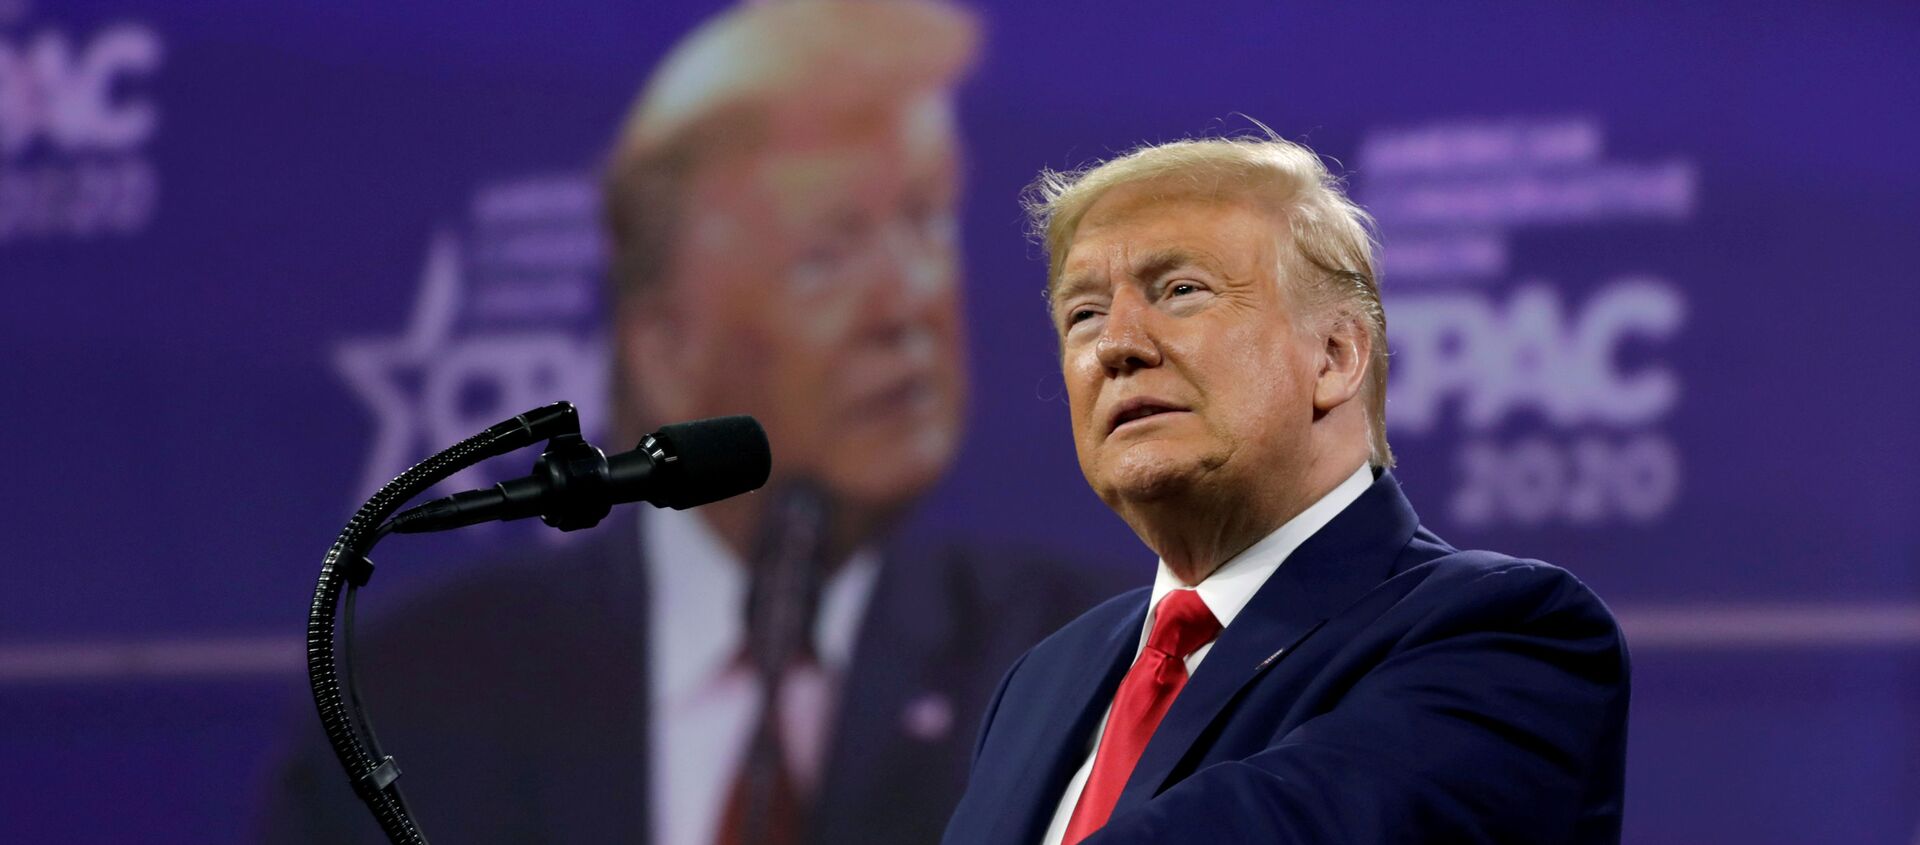 U.S. President Donald Trump addresses the Conservative Political Action Conference (CPAC) annual meeting at National Harbor in Oxon Hill, Maryland, U.S., February 29, 2020 - Sputnik International, 1920, 28.02.2021